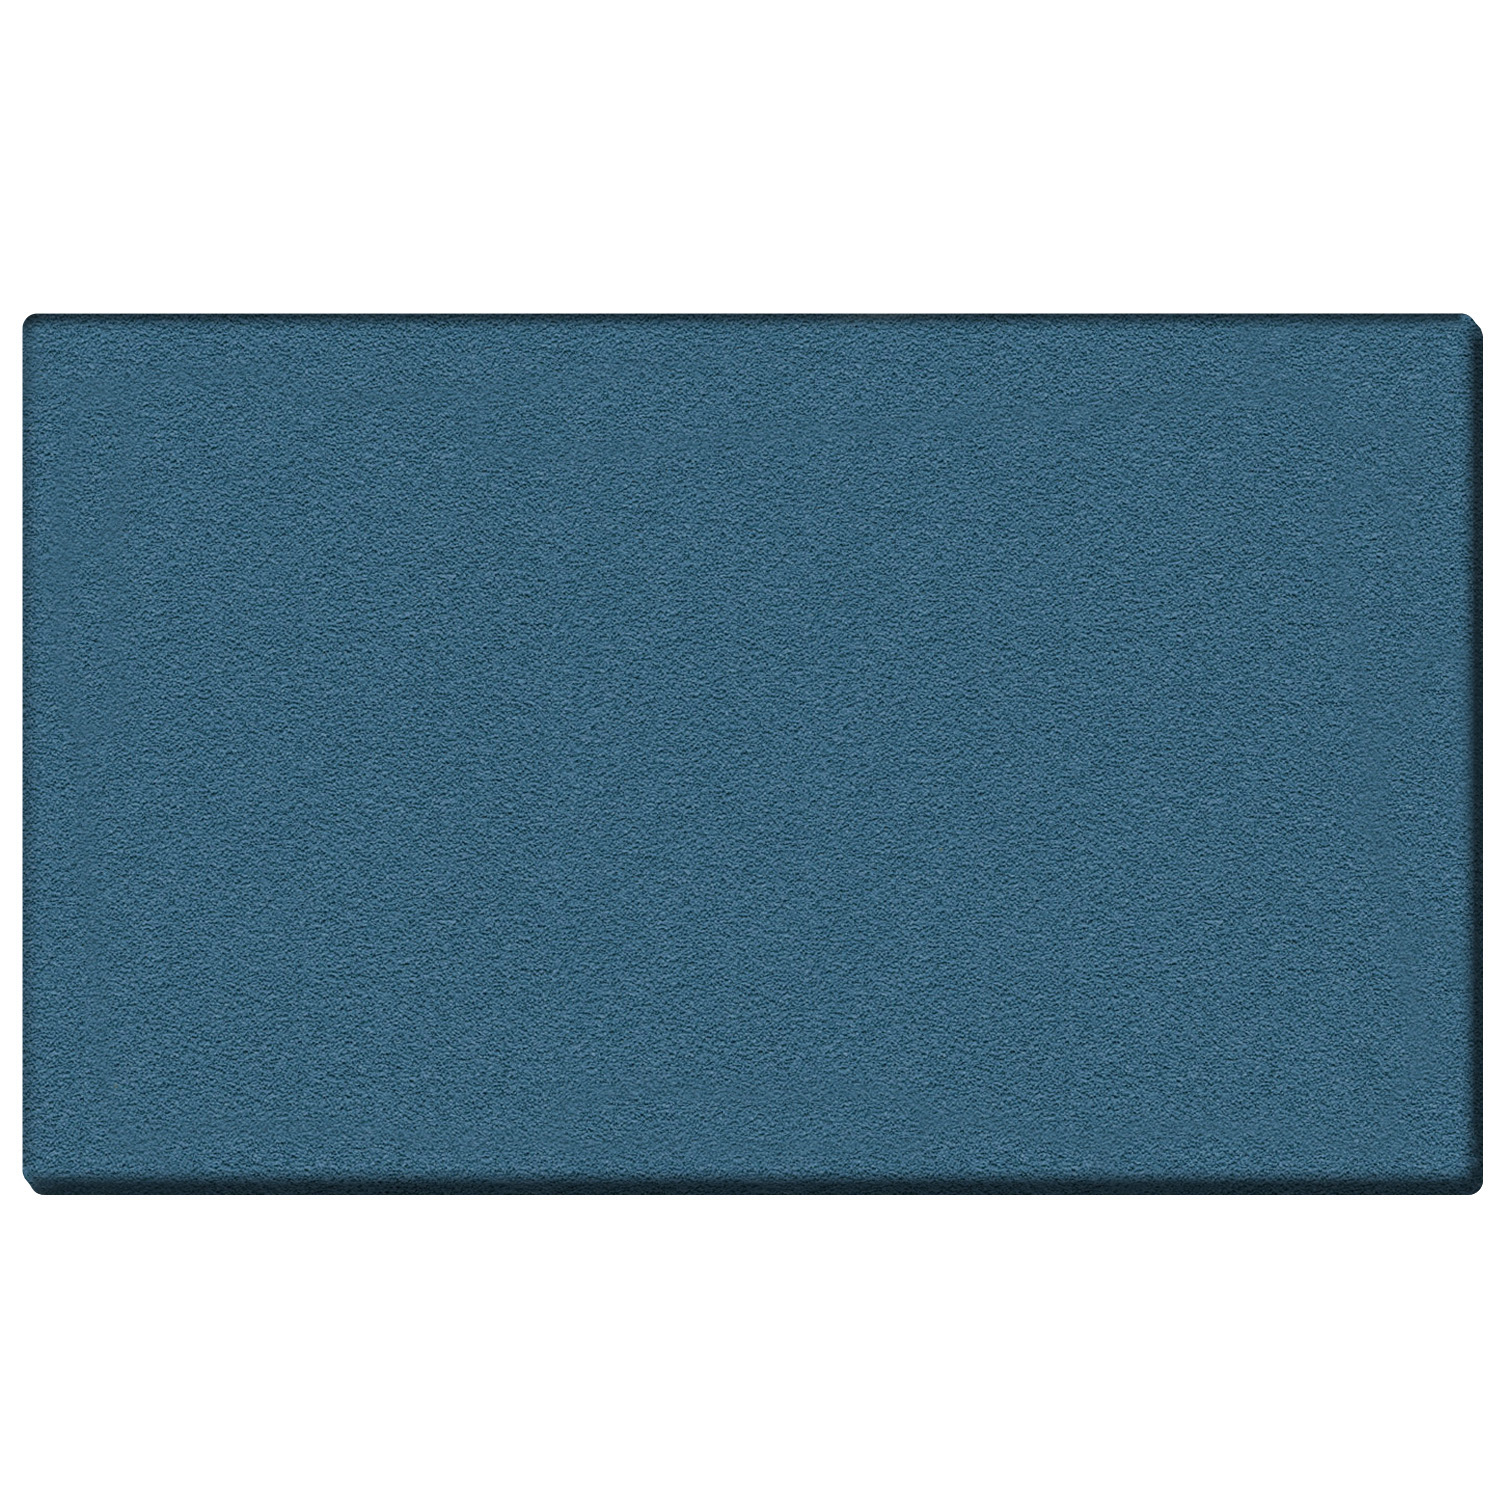 Picture of Ghent 12UV46-W191 Vinyl Tackboard - Wrapped Edge - Ocean